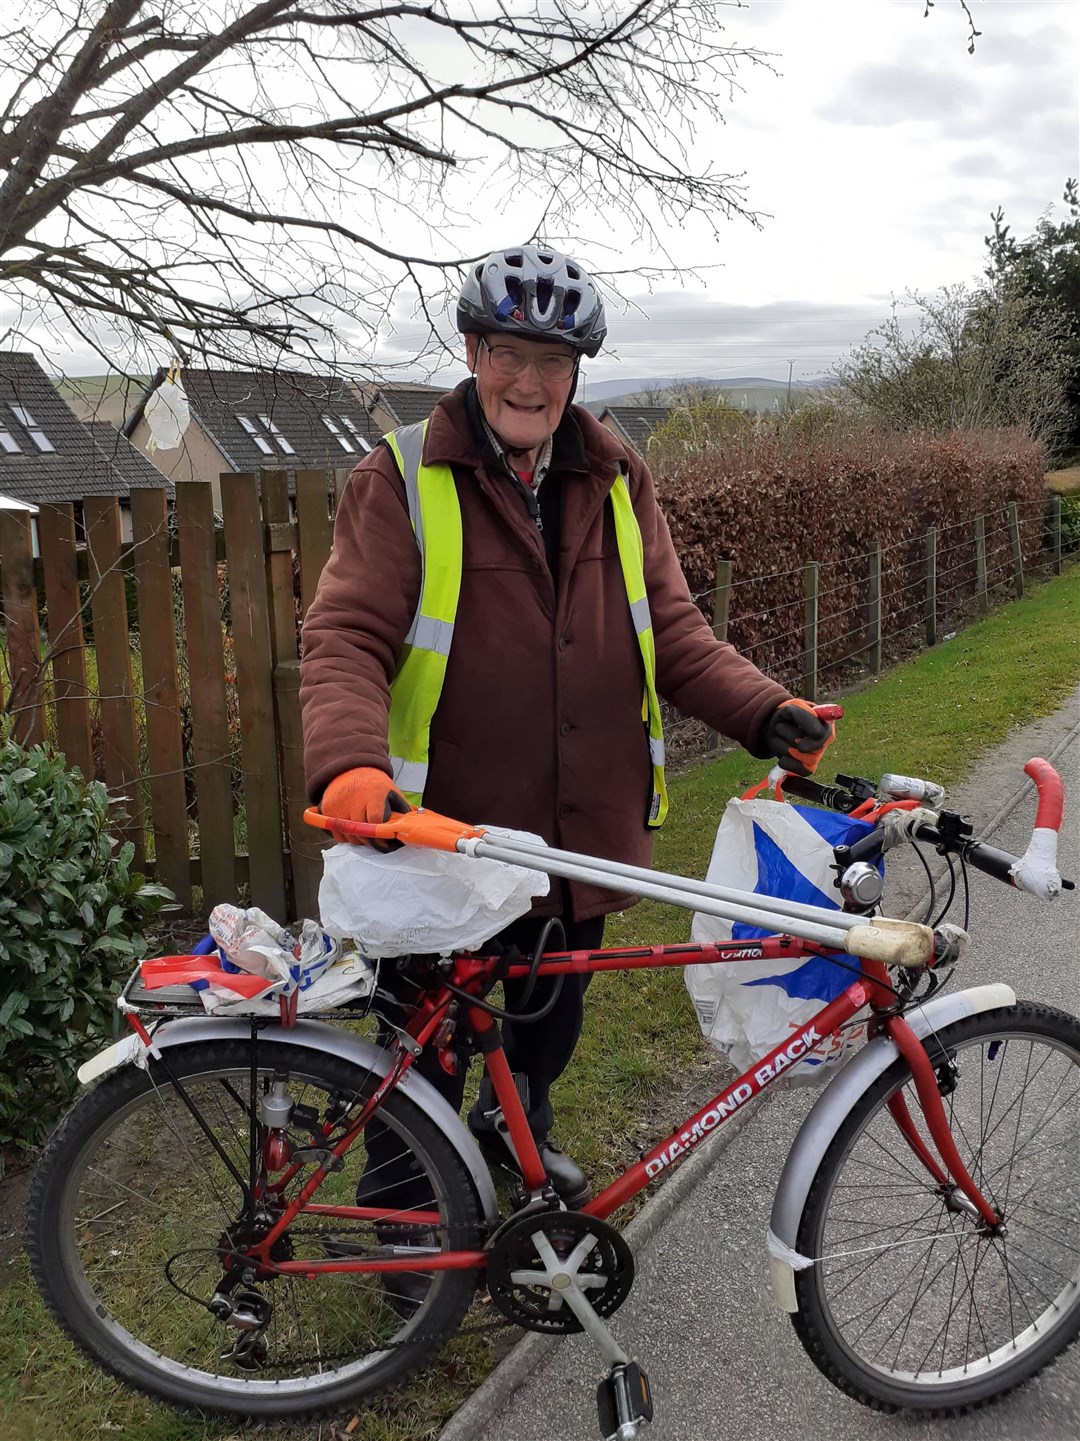 Douglas Morrison (78) from Huntly has been nominated as a Community Champion.